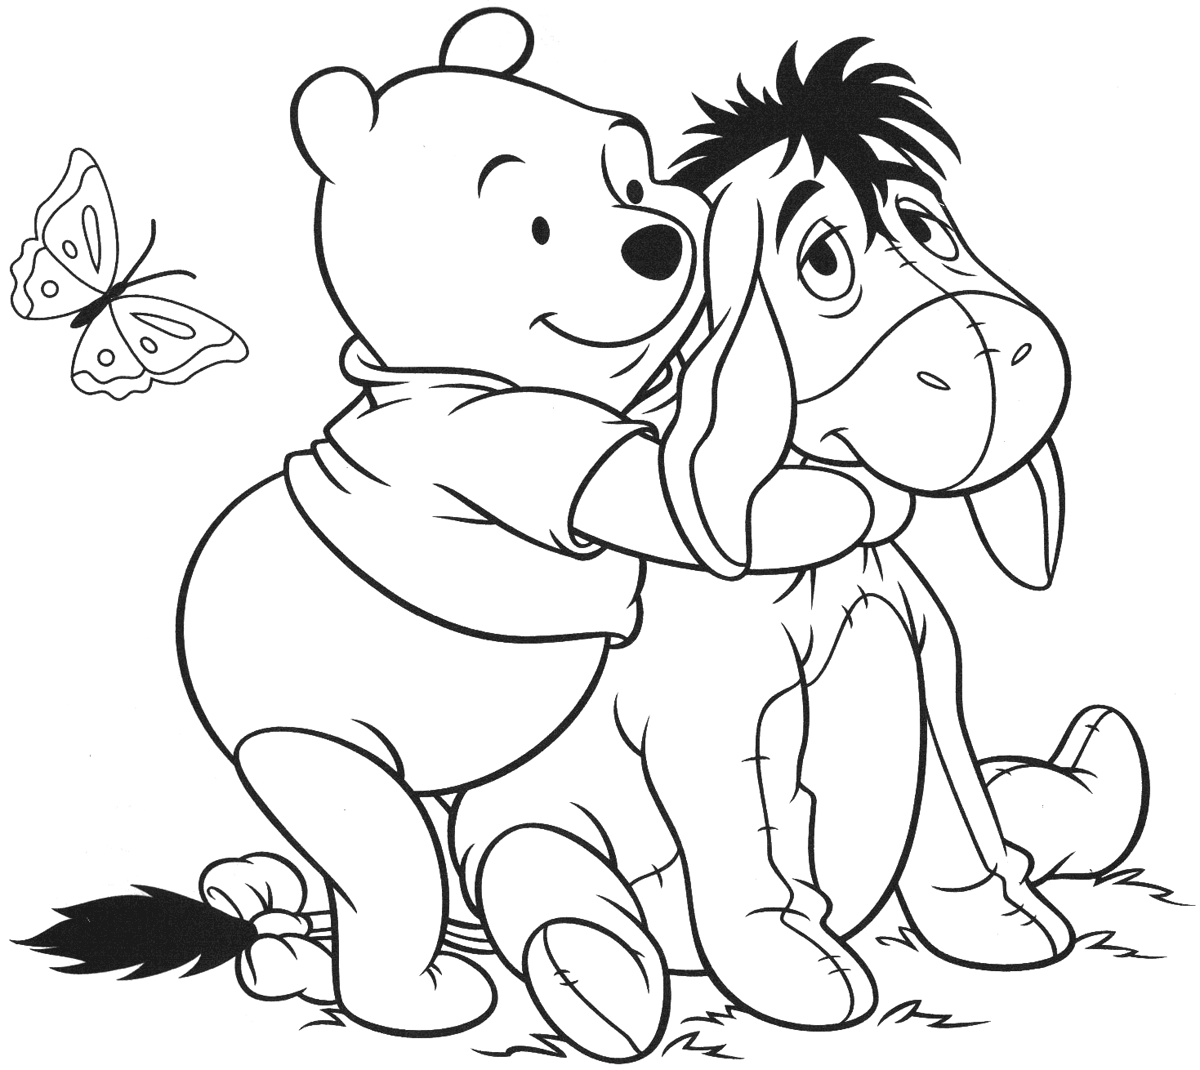 Pooh Hugs For Everyone Coloring Page Coloring Page